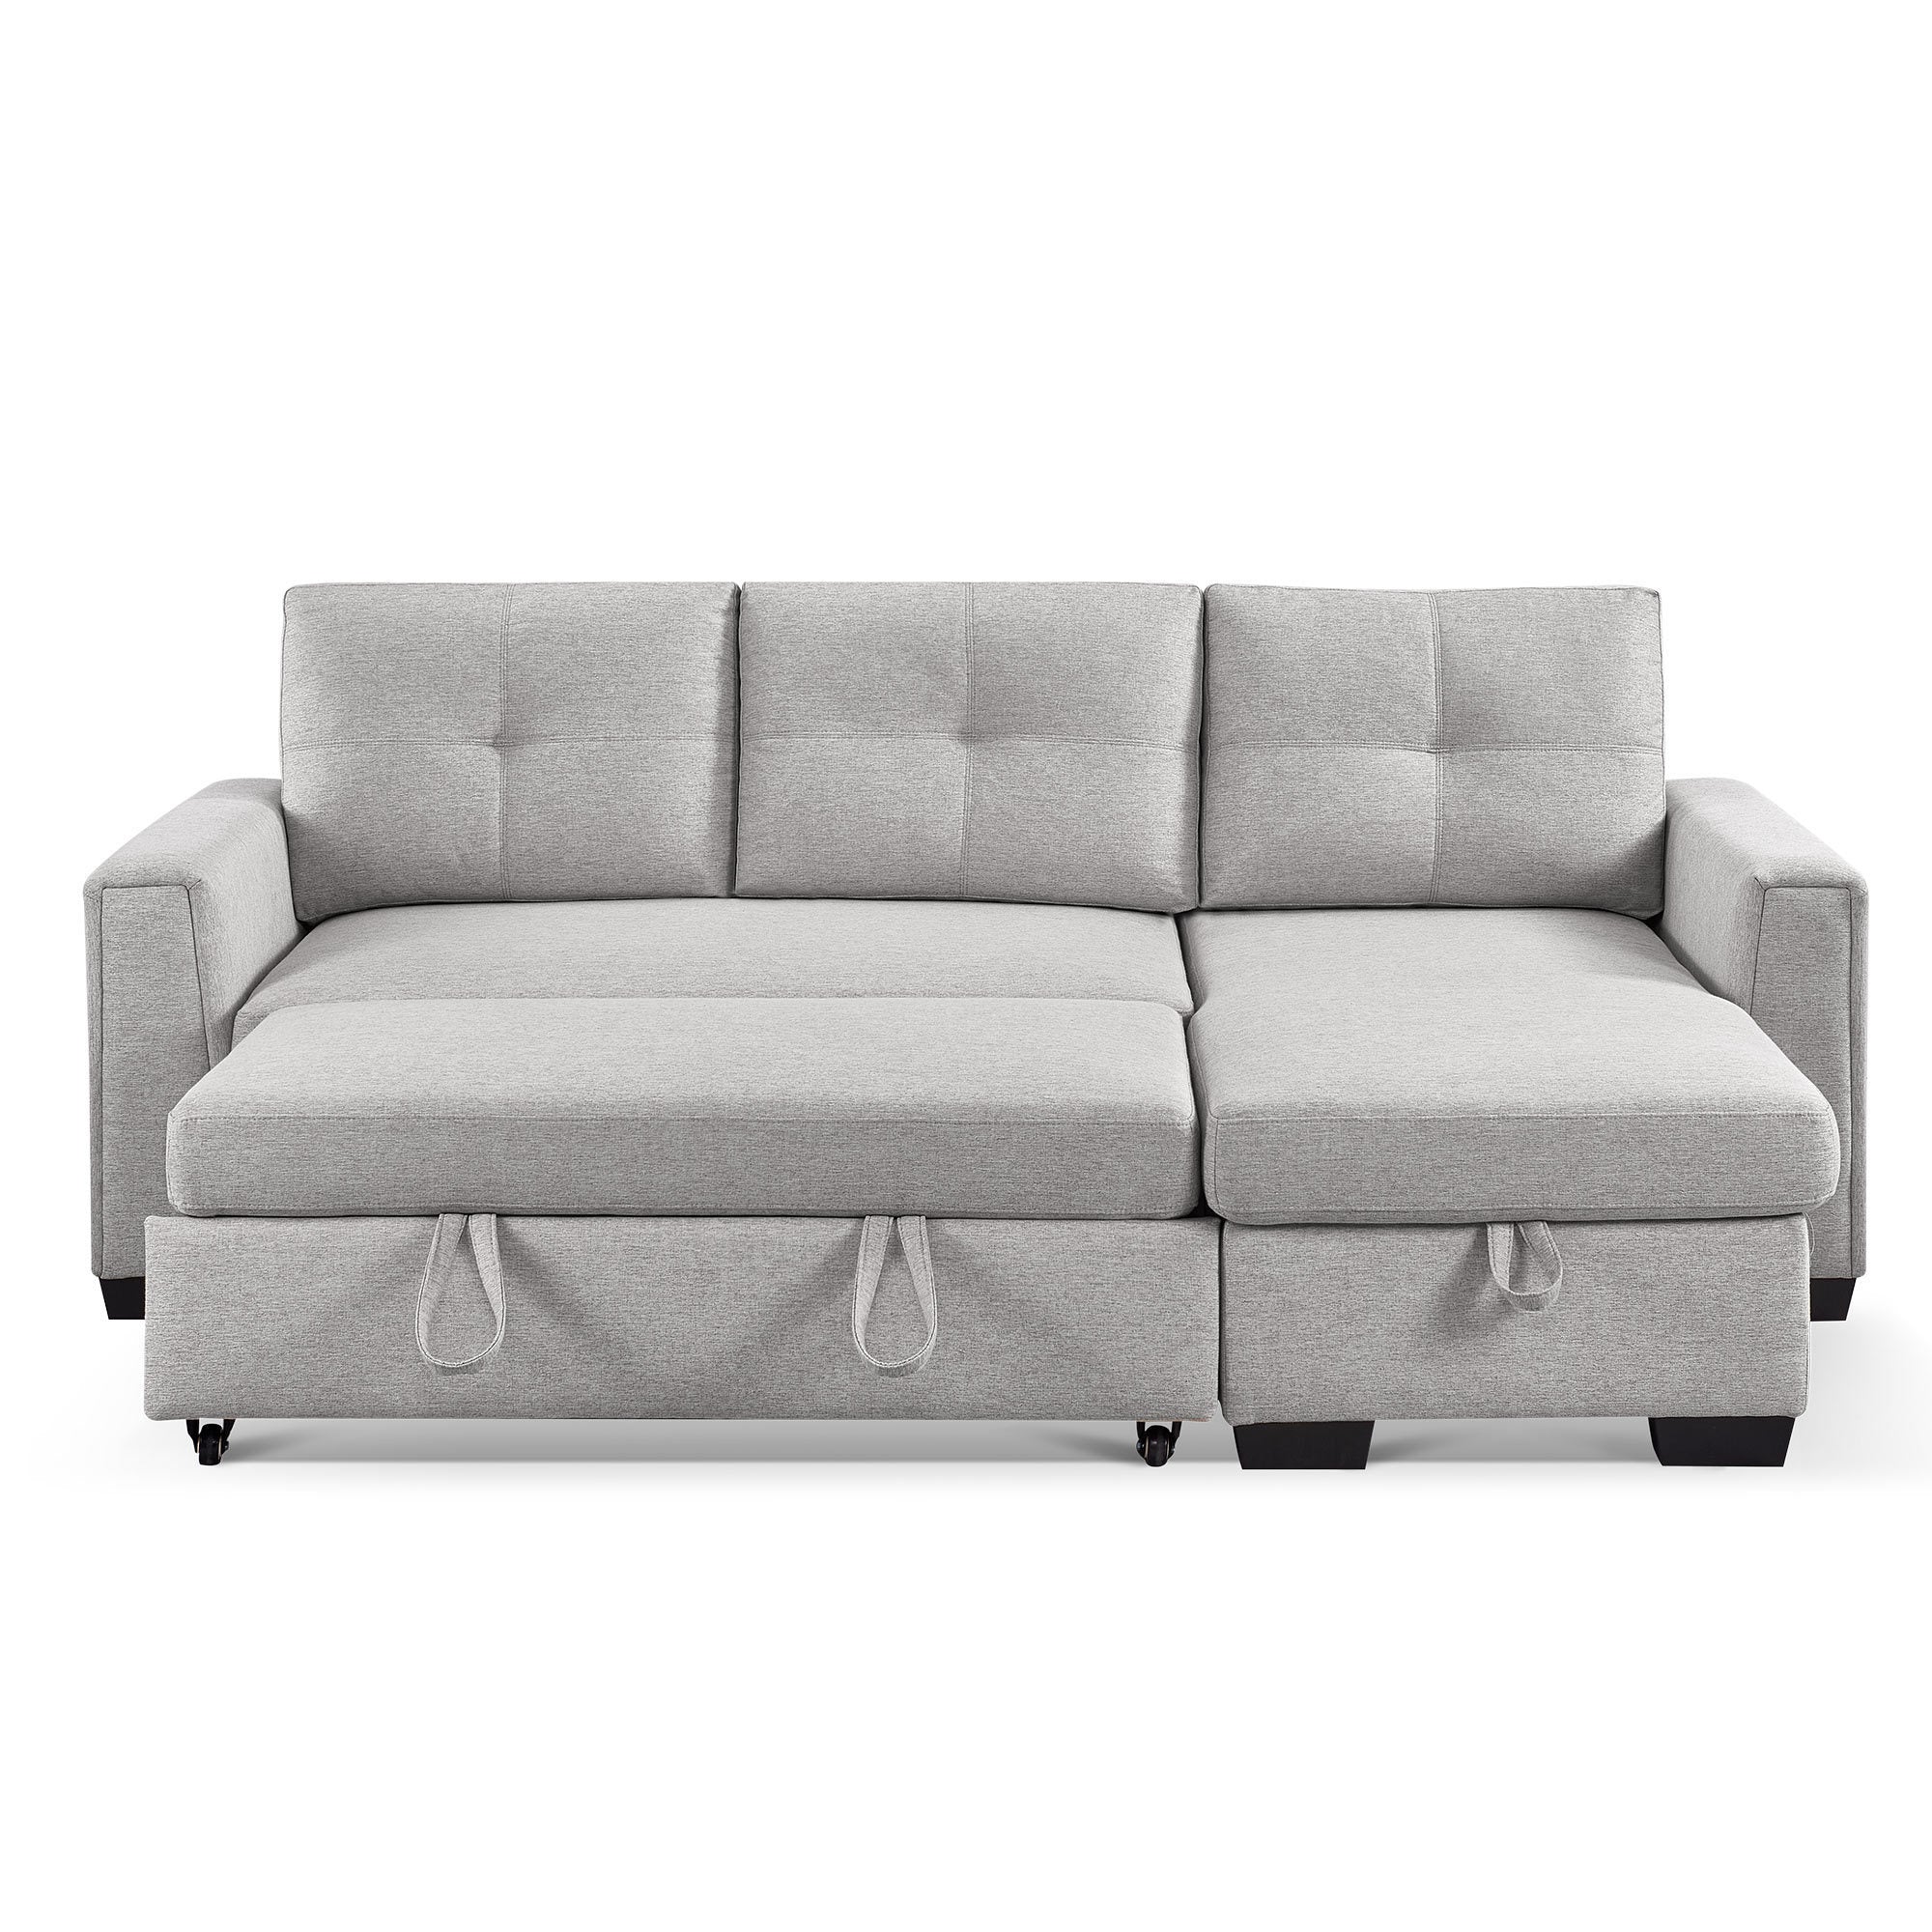 91.7" L-Shape Sleeper Sectional Sofa w/Storage Chaise - Light Grey Fabric-Sleeper Sectionals-American Furniture Outlet